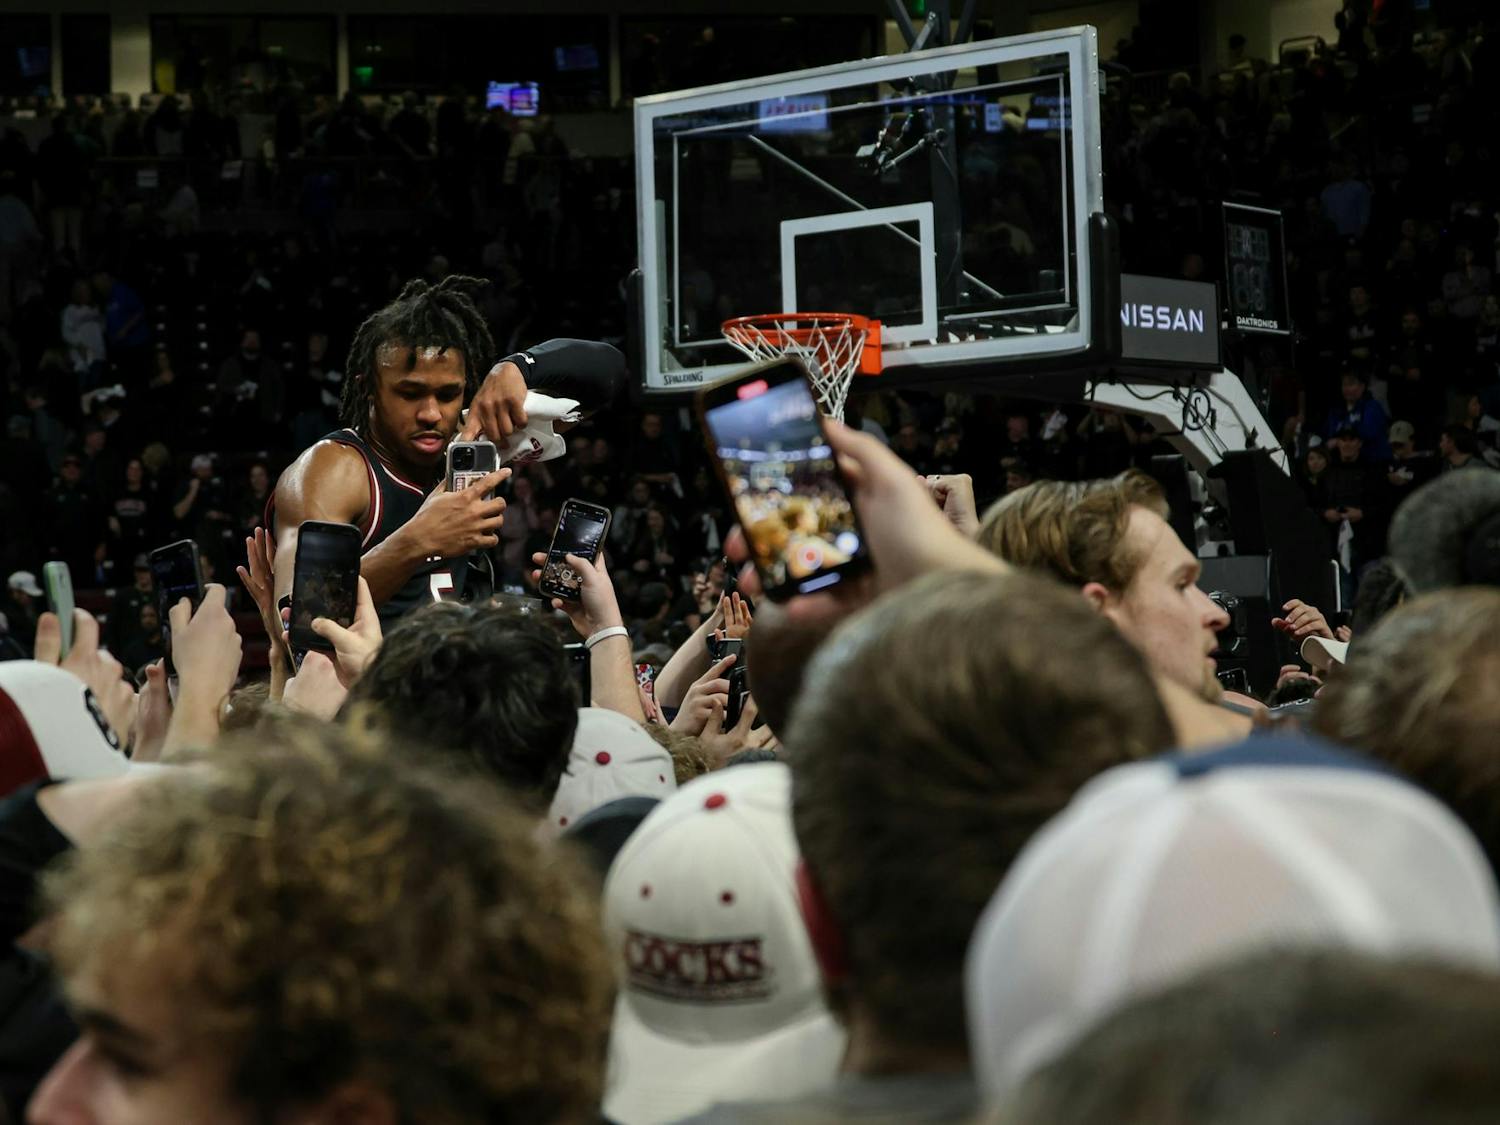 During the post-game celebration at Colonial Life Arena, fans lifted junior guard Meechie Johnson while he took videos on their phones. Johnson scored 14 points for South Carolina in its 79-62 victory over No. 6 Kentucky on Jan. 23, 2024.